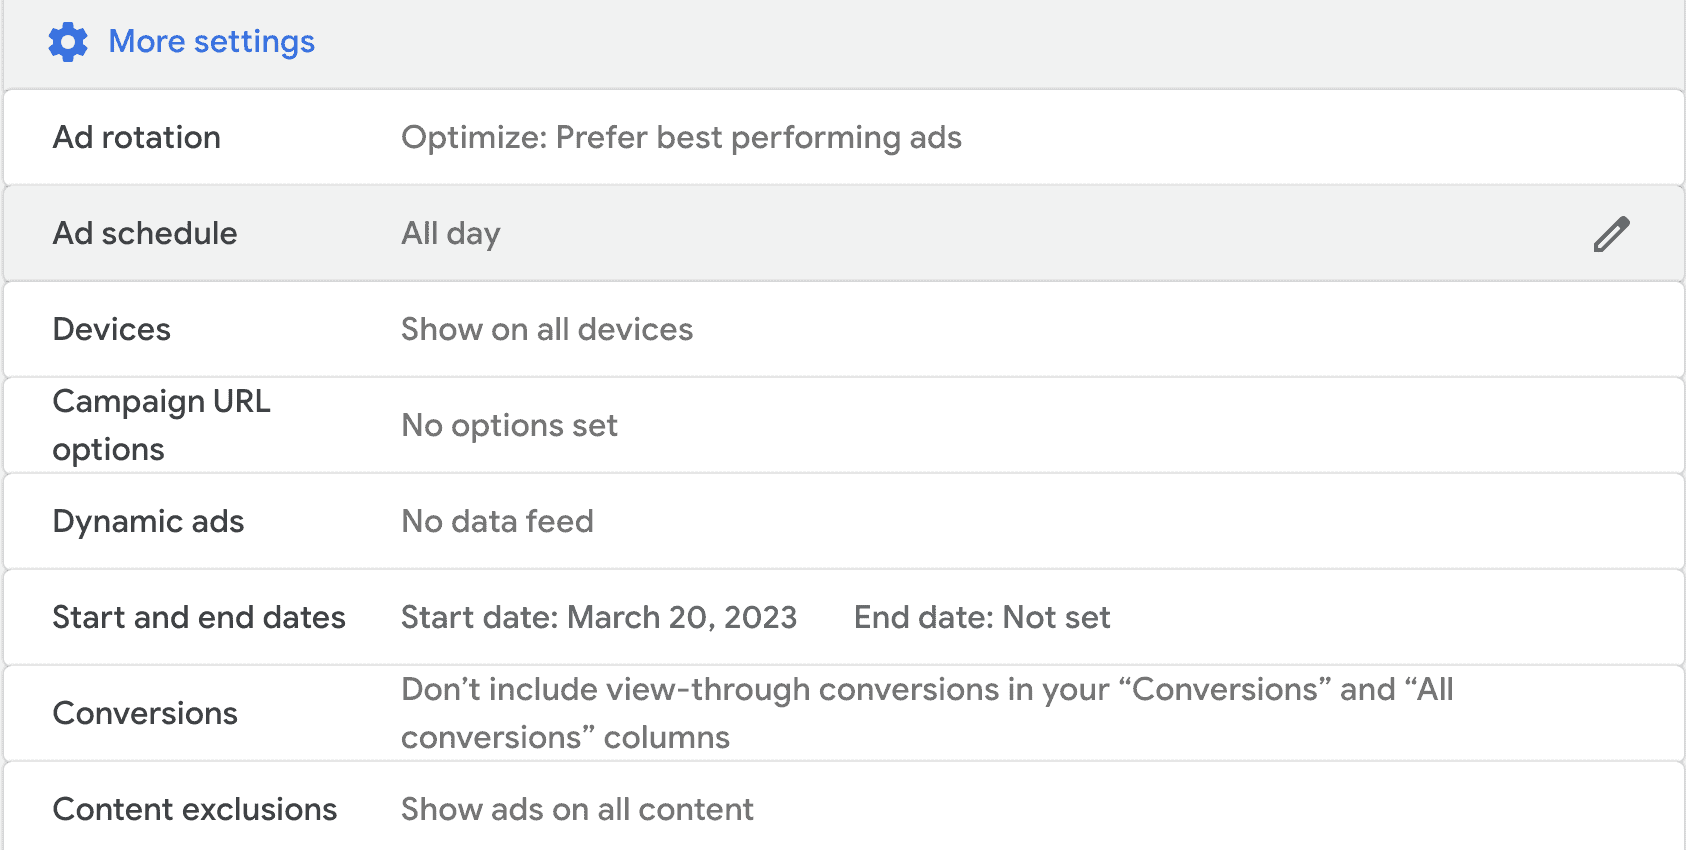 Google Ads campaign "more settings" include ad rotation, ad schedule, devices, and more